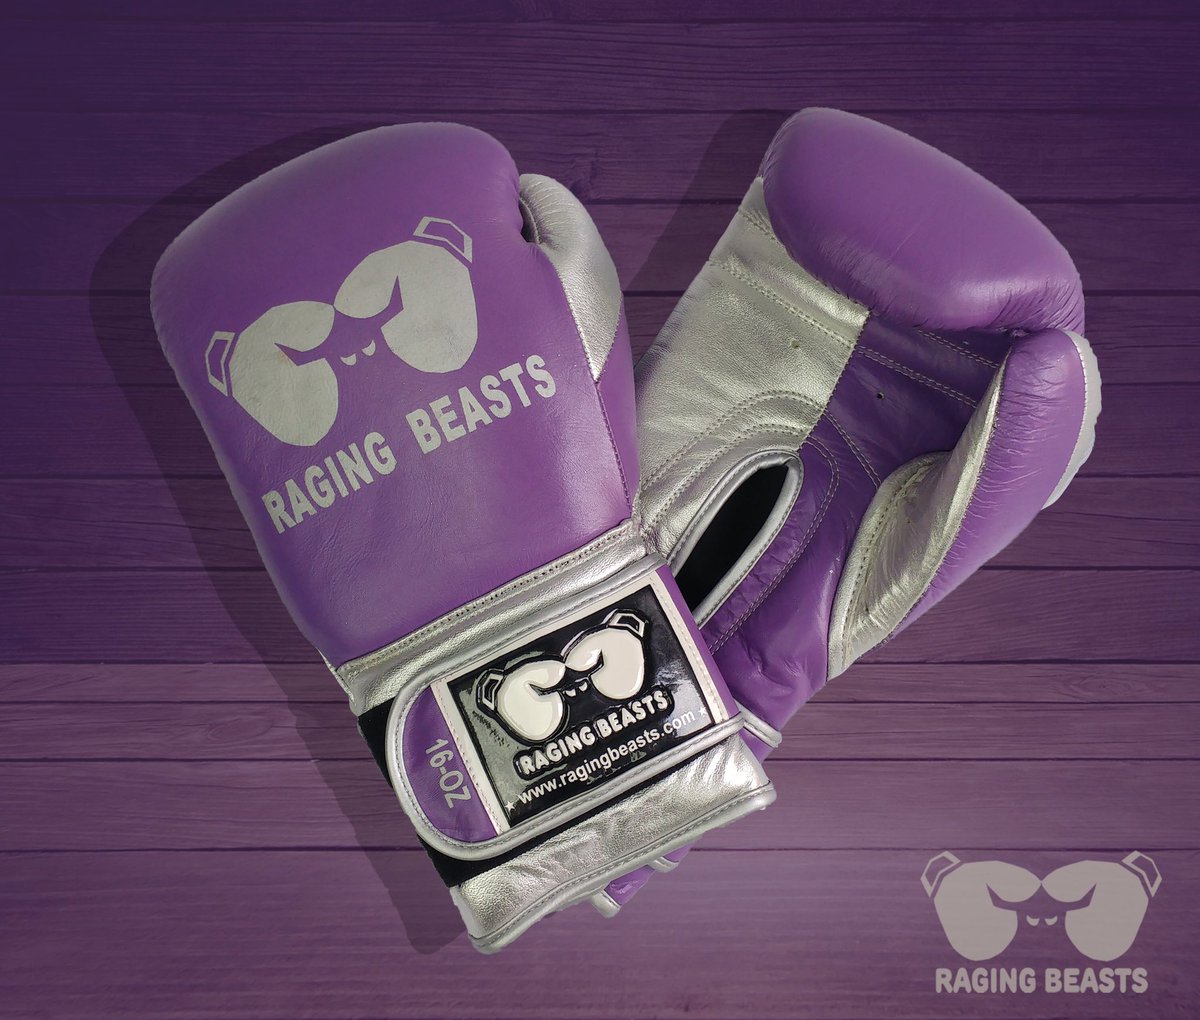 Who says you can't look mean in purple? #boxinggloves #fightwear #customboxinggear #boxing #purple